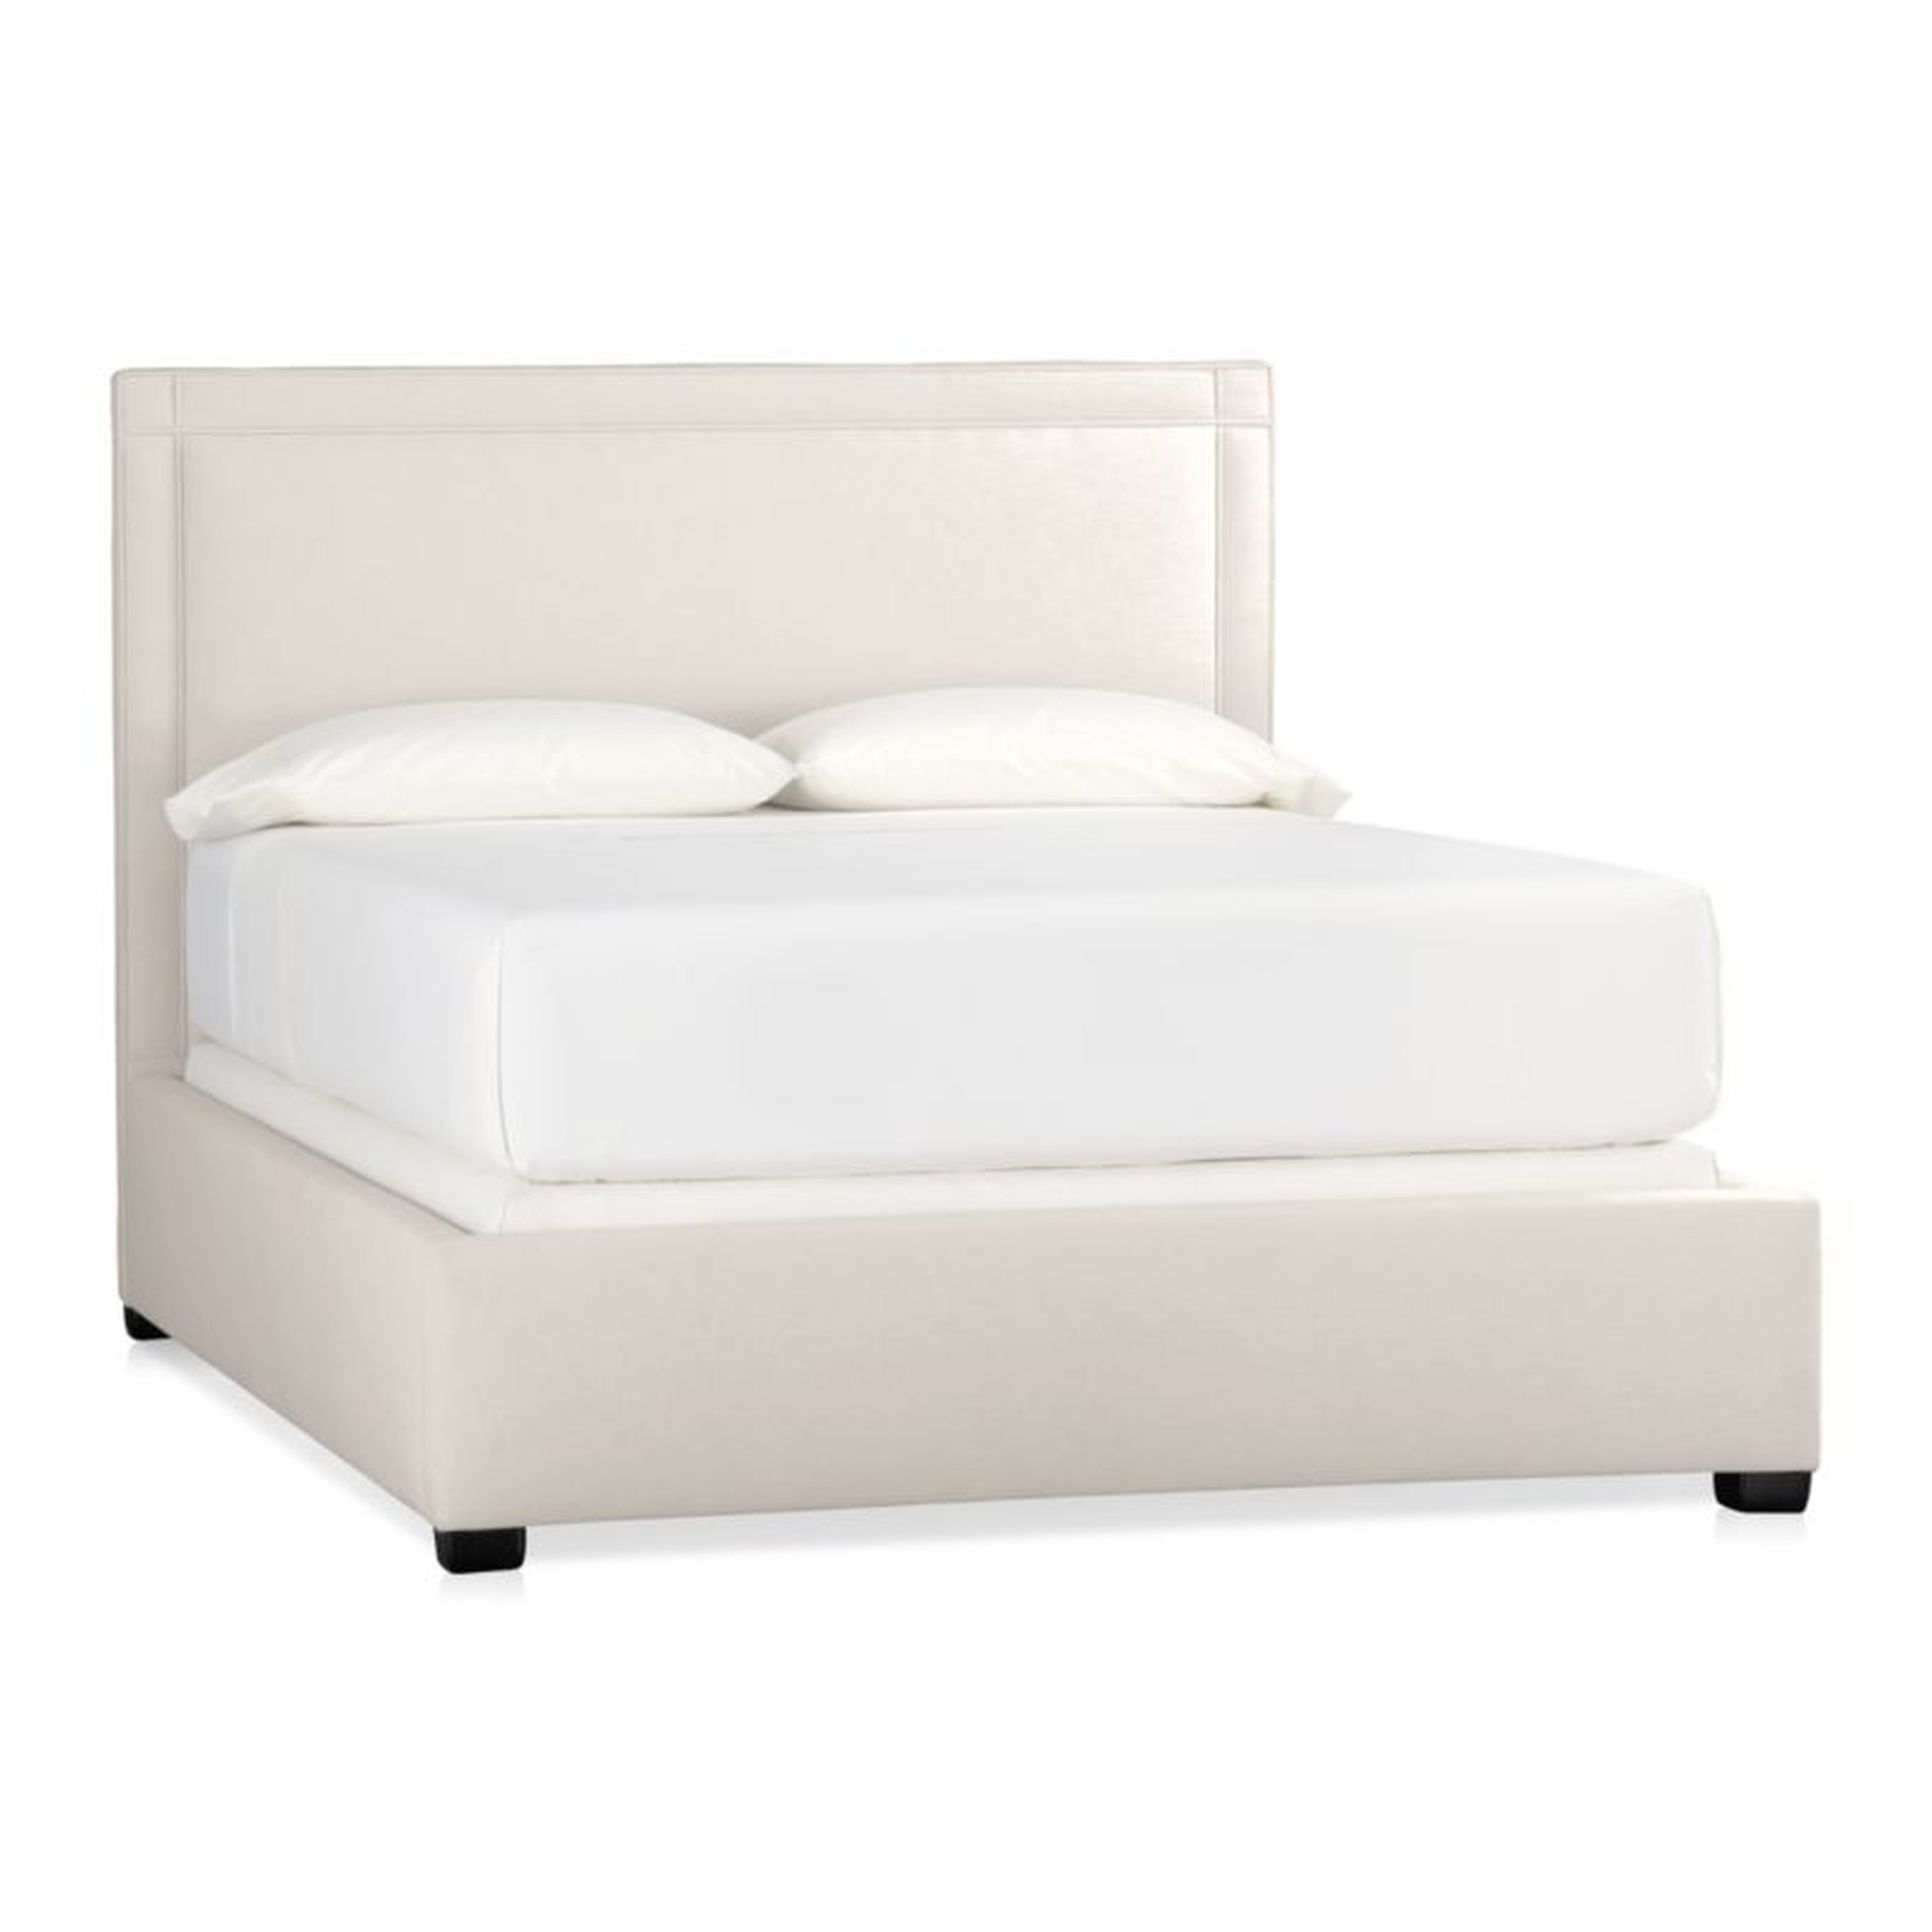 Border Upholstered Queen Bed, Natural - Crate and Barrel